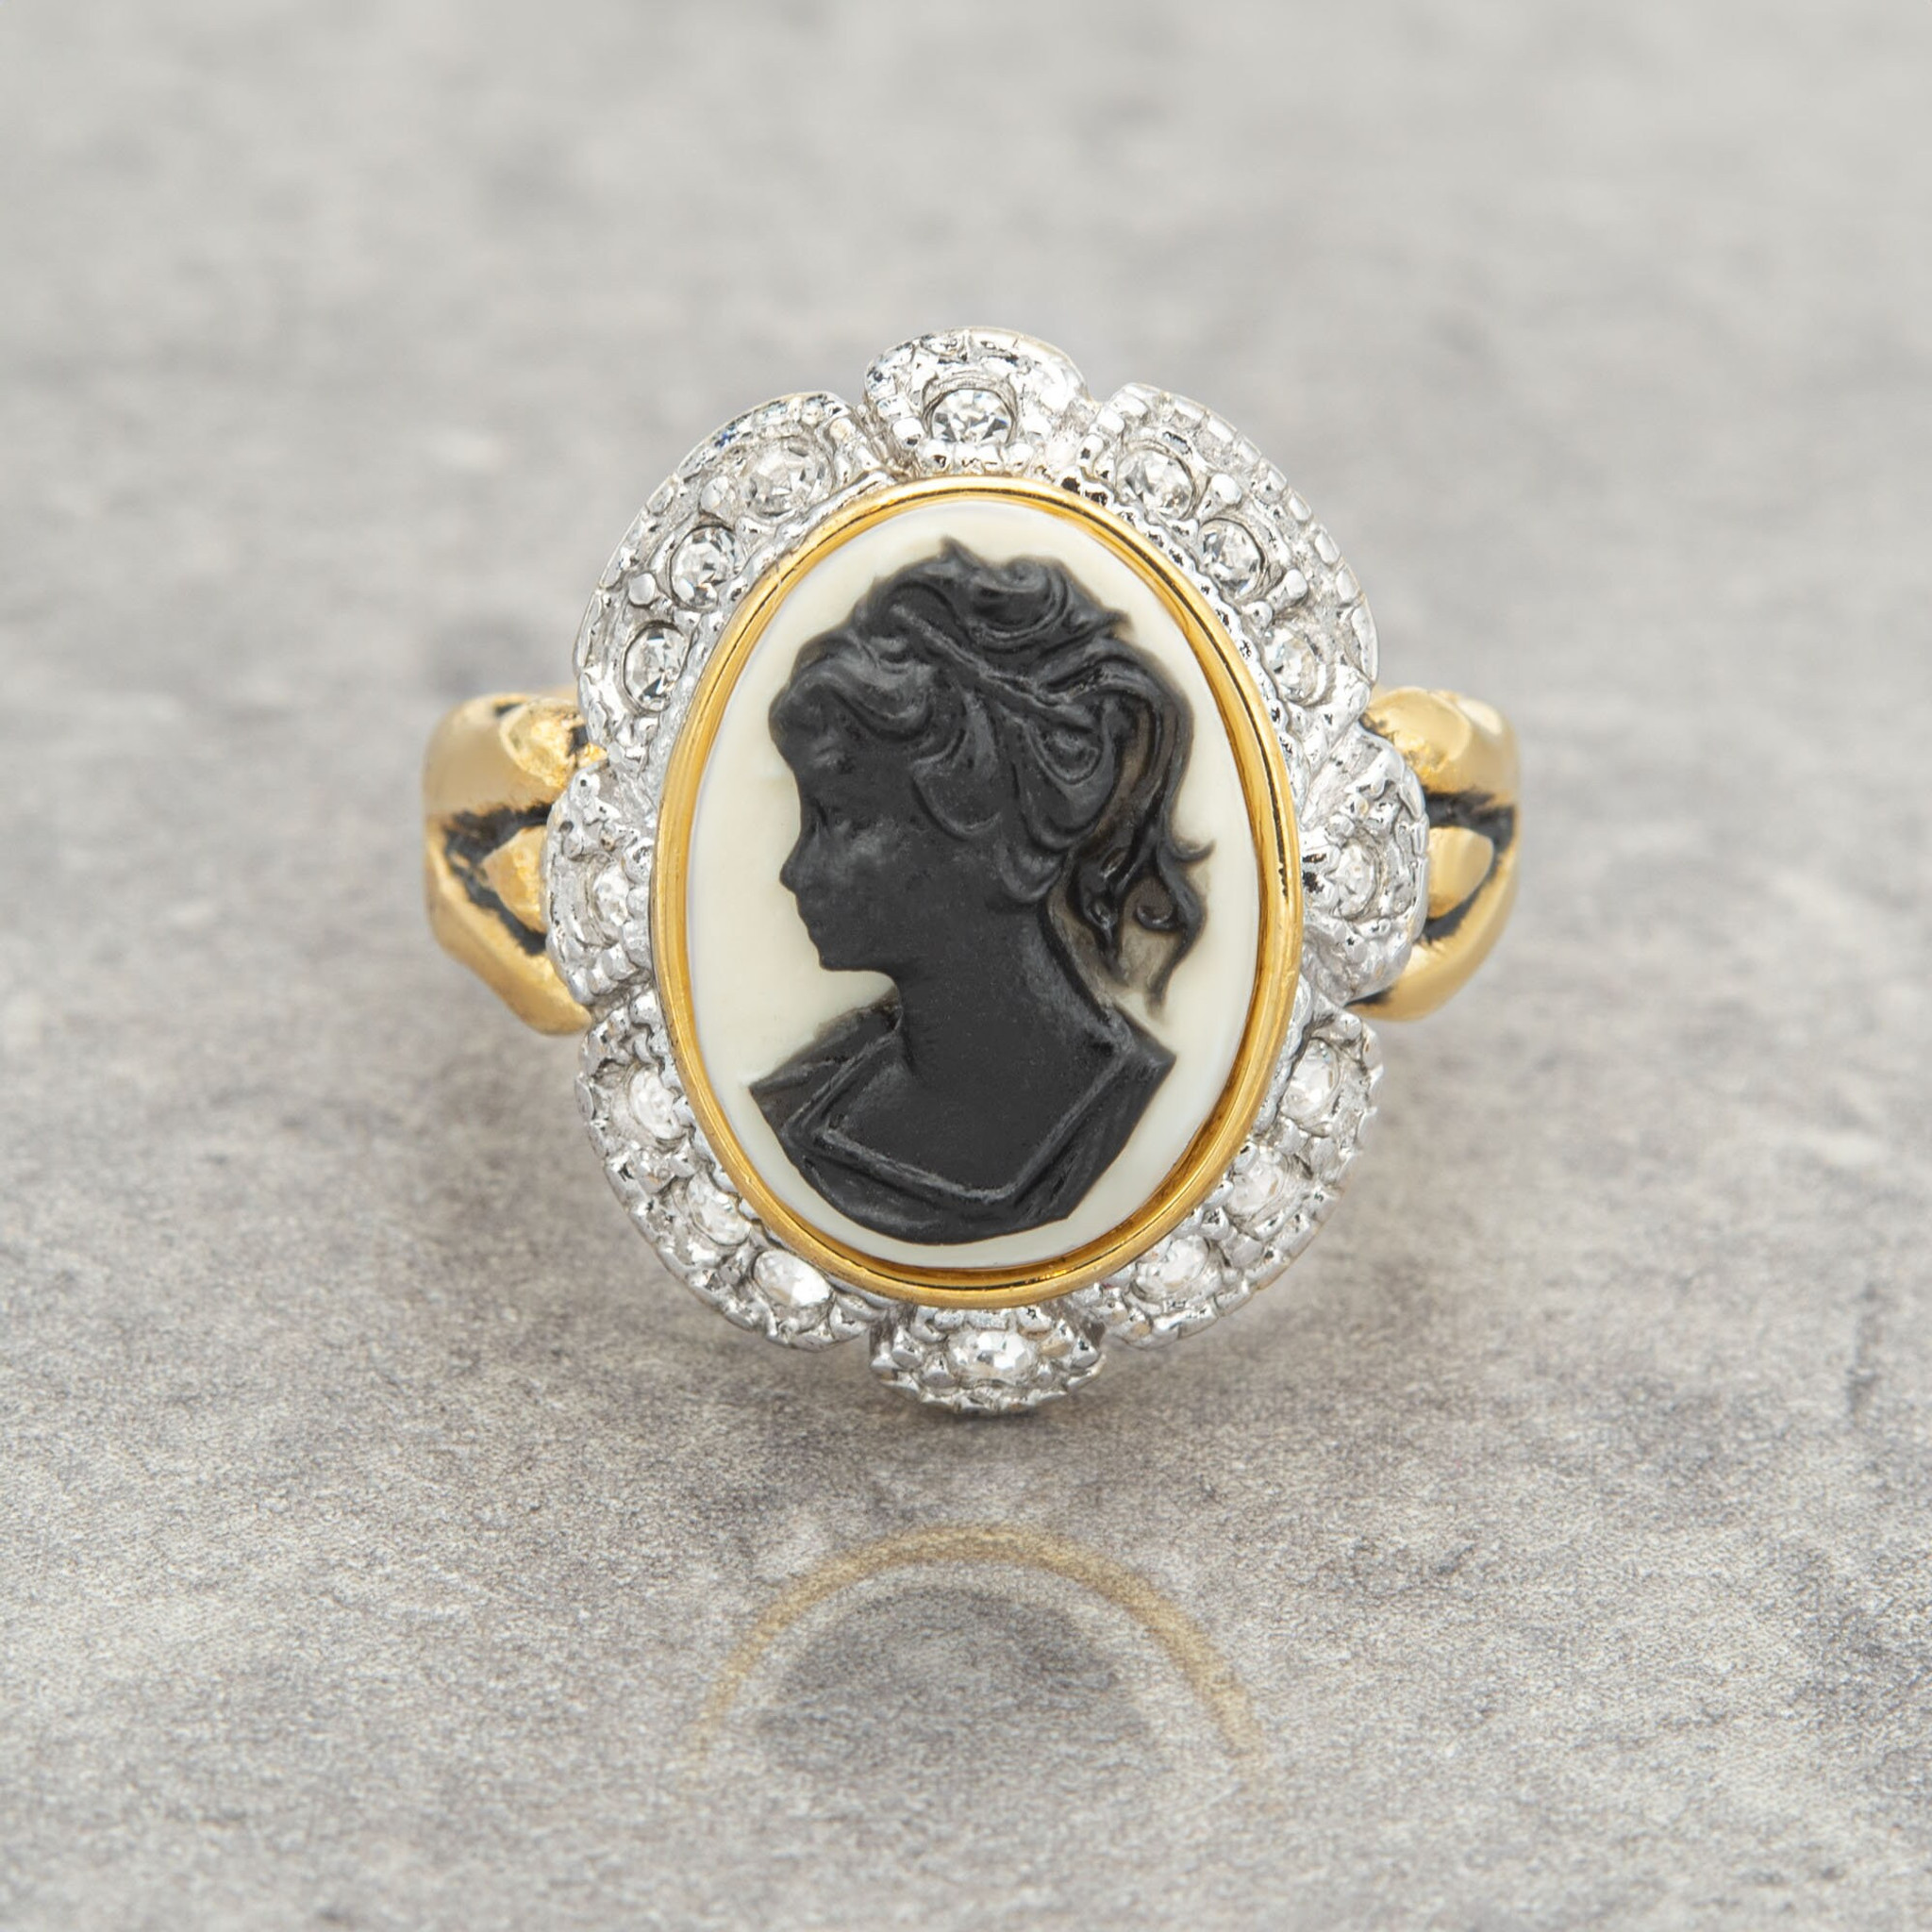 Vintage Women's Ring 18k Gold Plated Black on White Cameo Clear